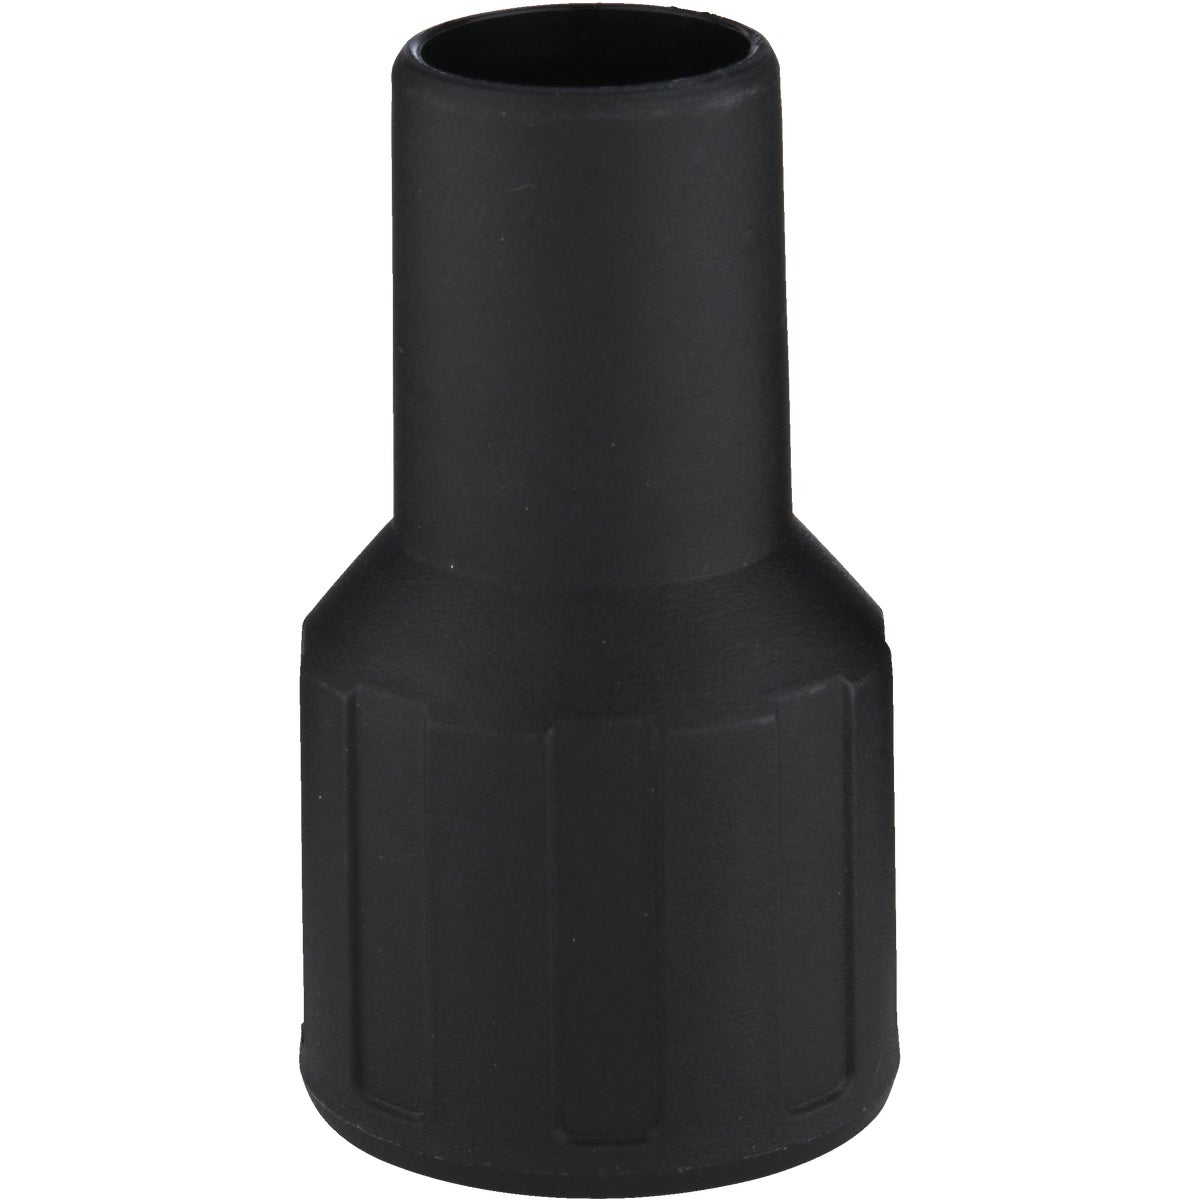 Channellock 1-1/4 In. to 1-7/8 In. Polypropylene Vacuum Tool Adapter